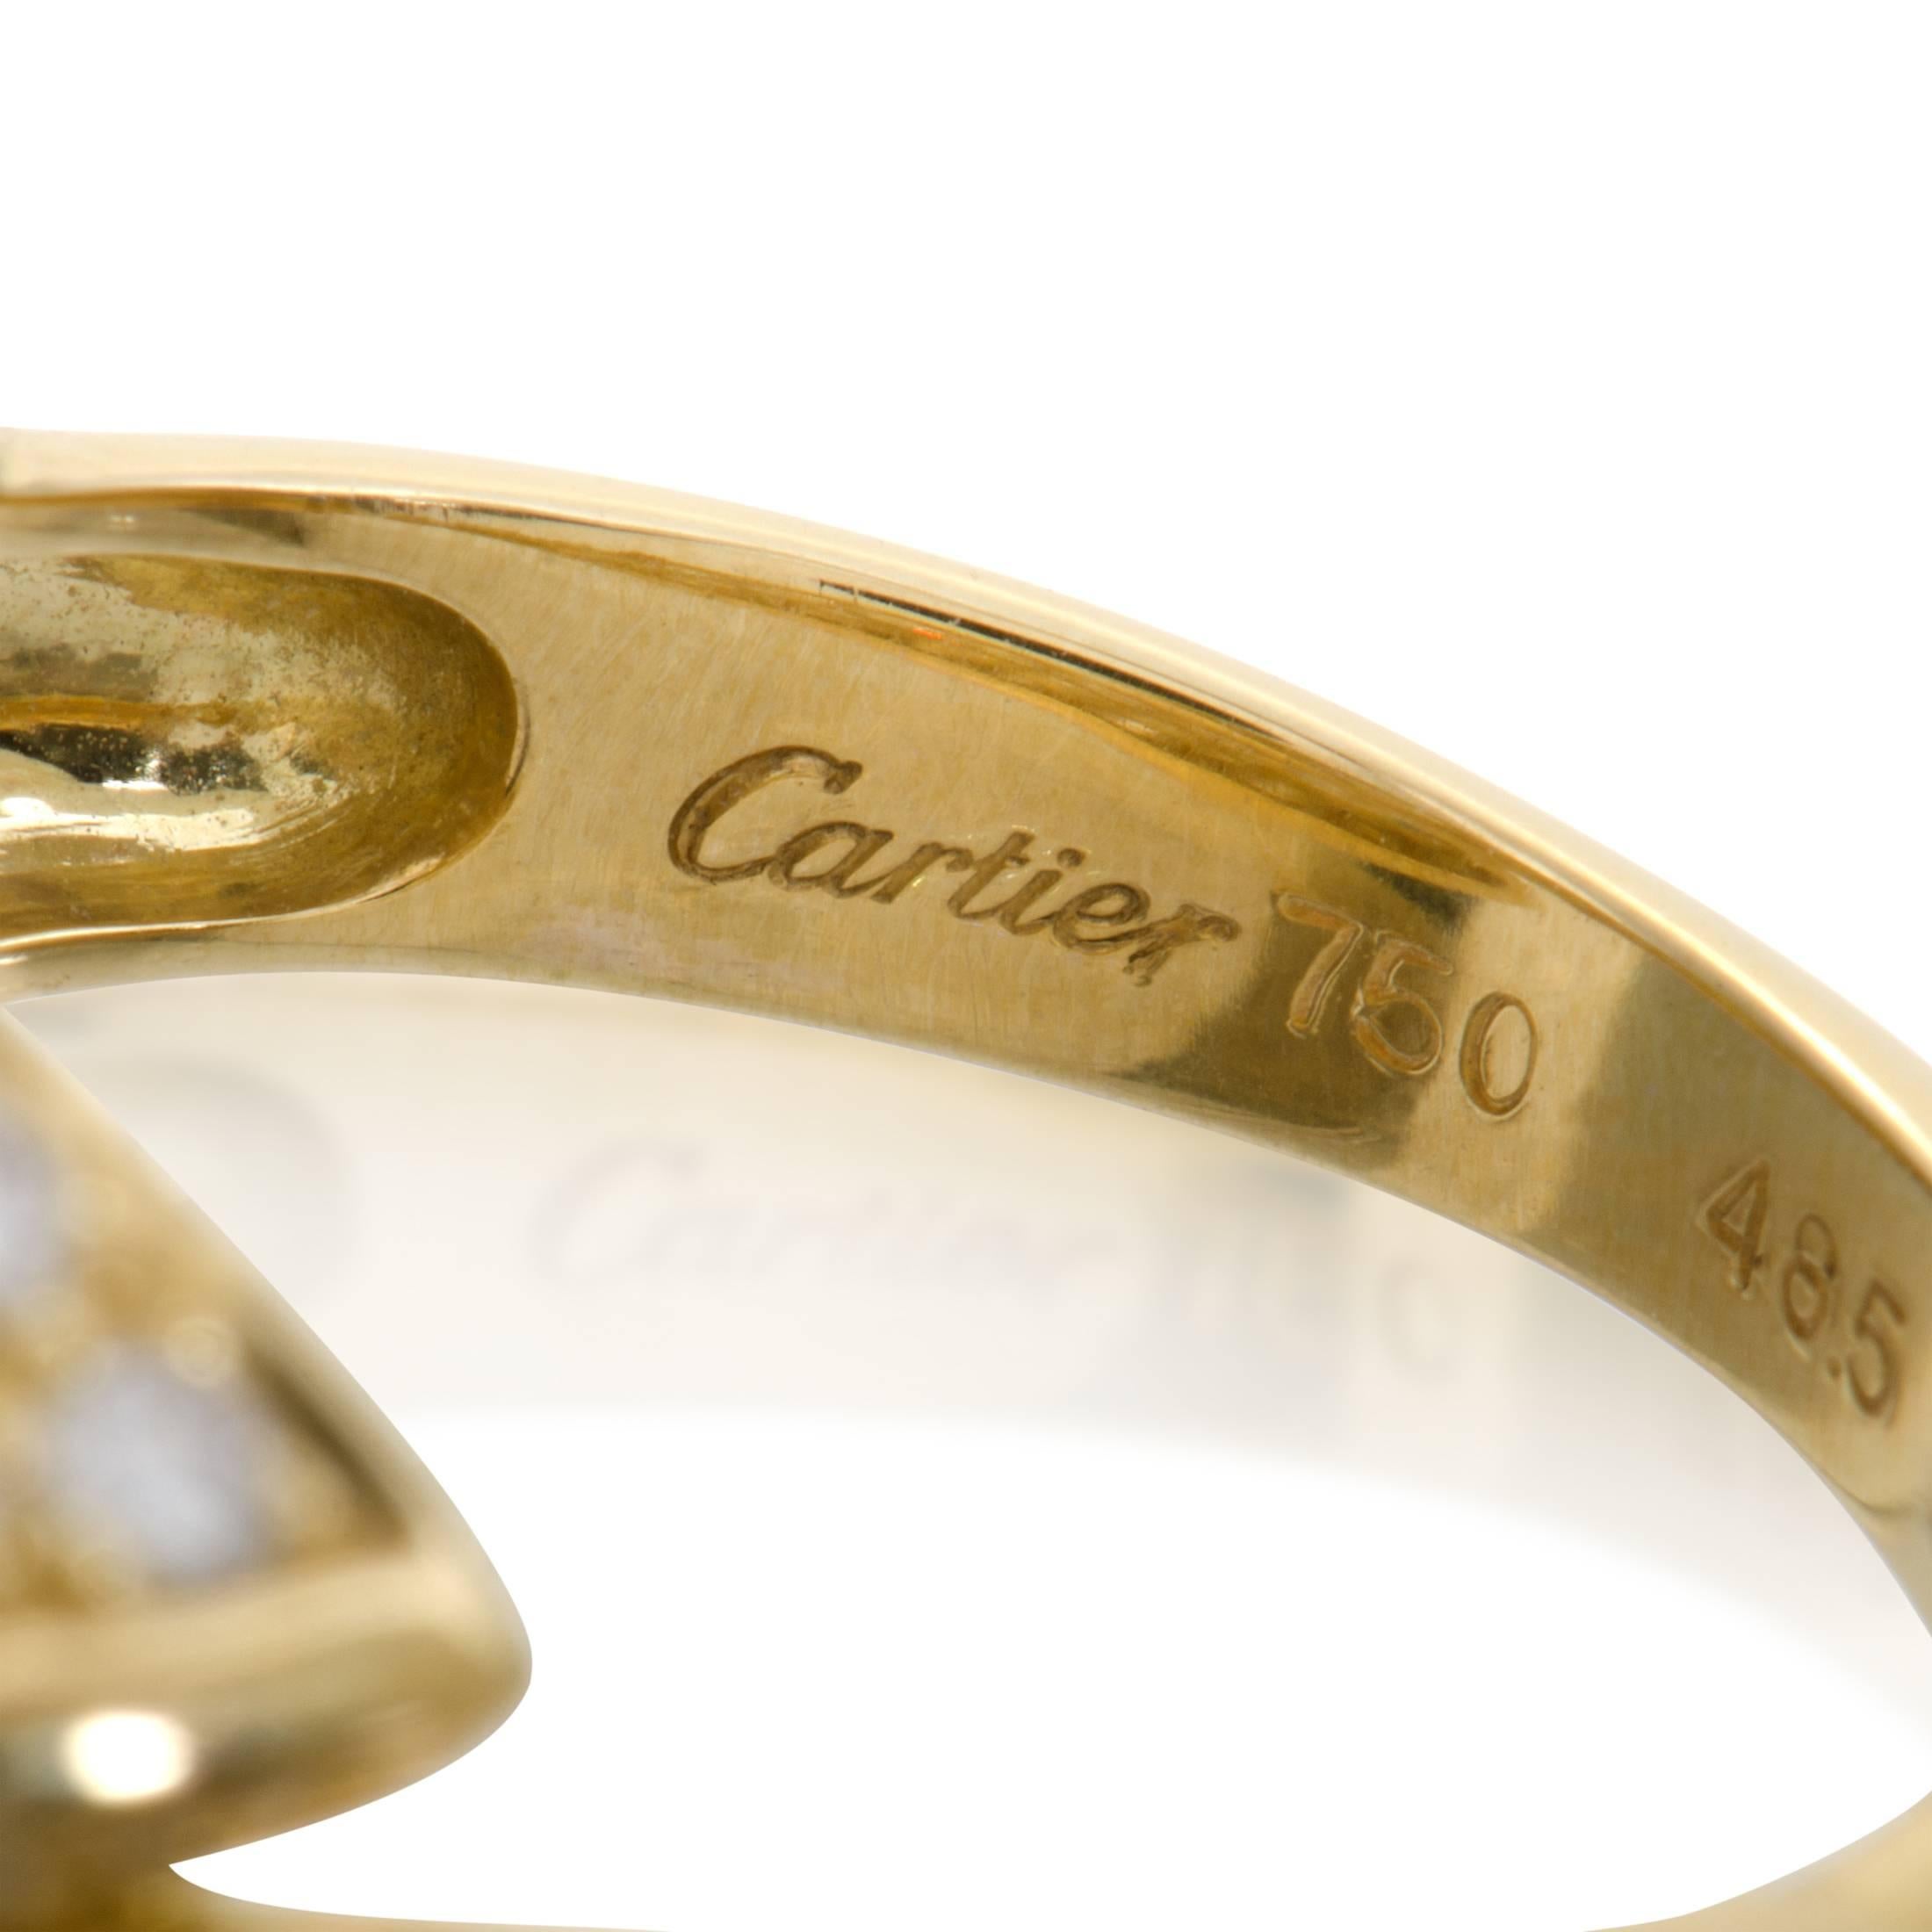 Women's Cartier Diamond Pave Yellow Gold Bypass Band Ring